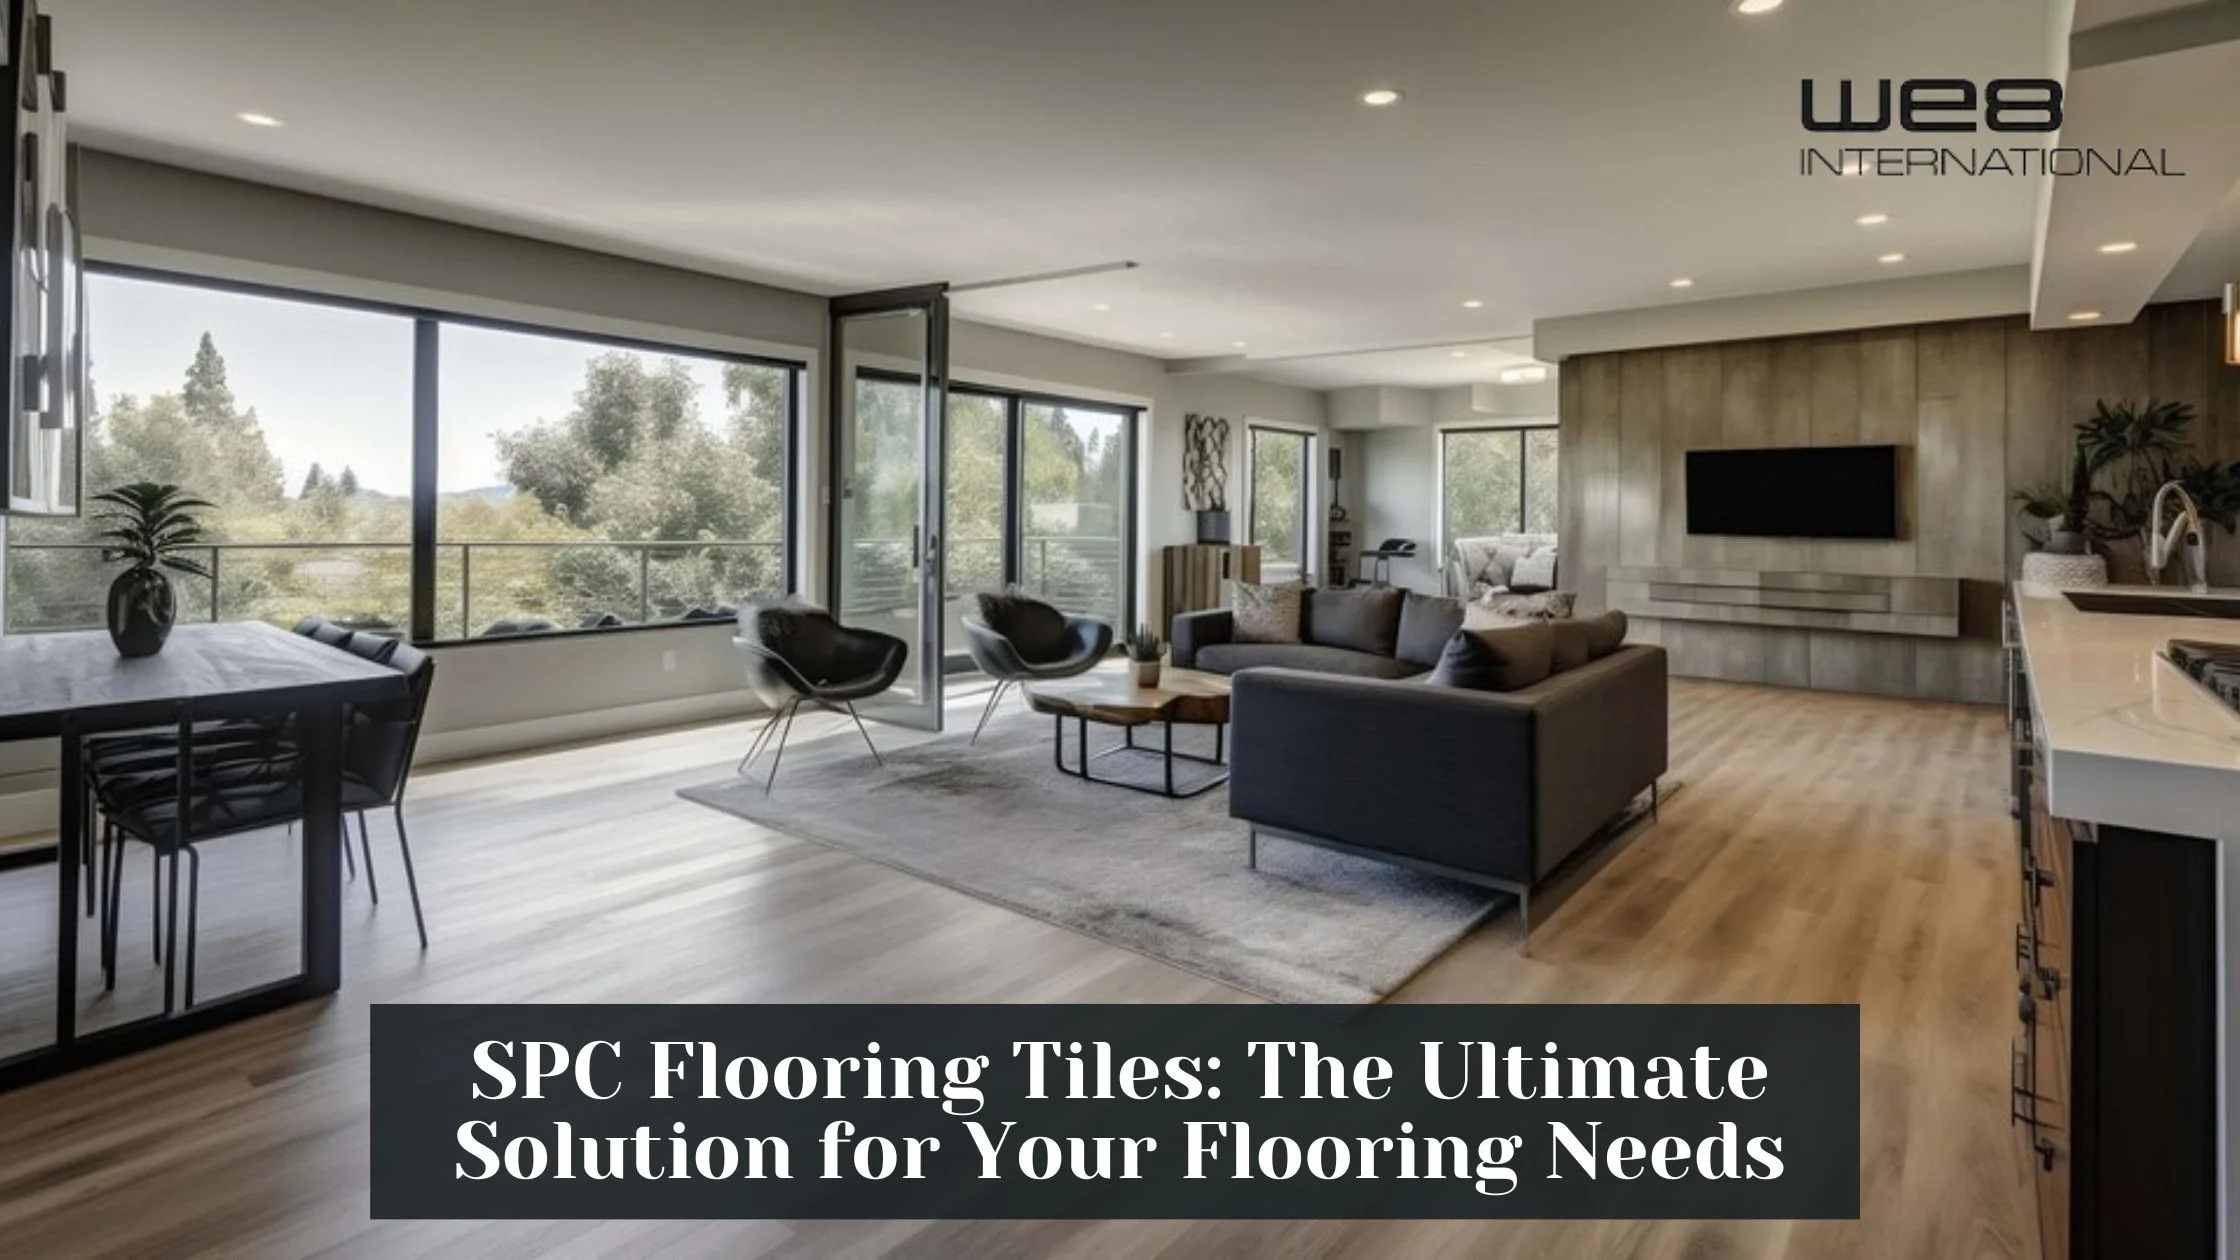 SPC Flooring Tiles: The Ultimate Solution for Your Flooring Needs